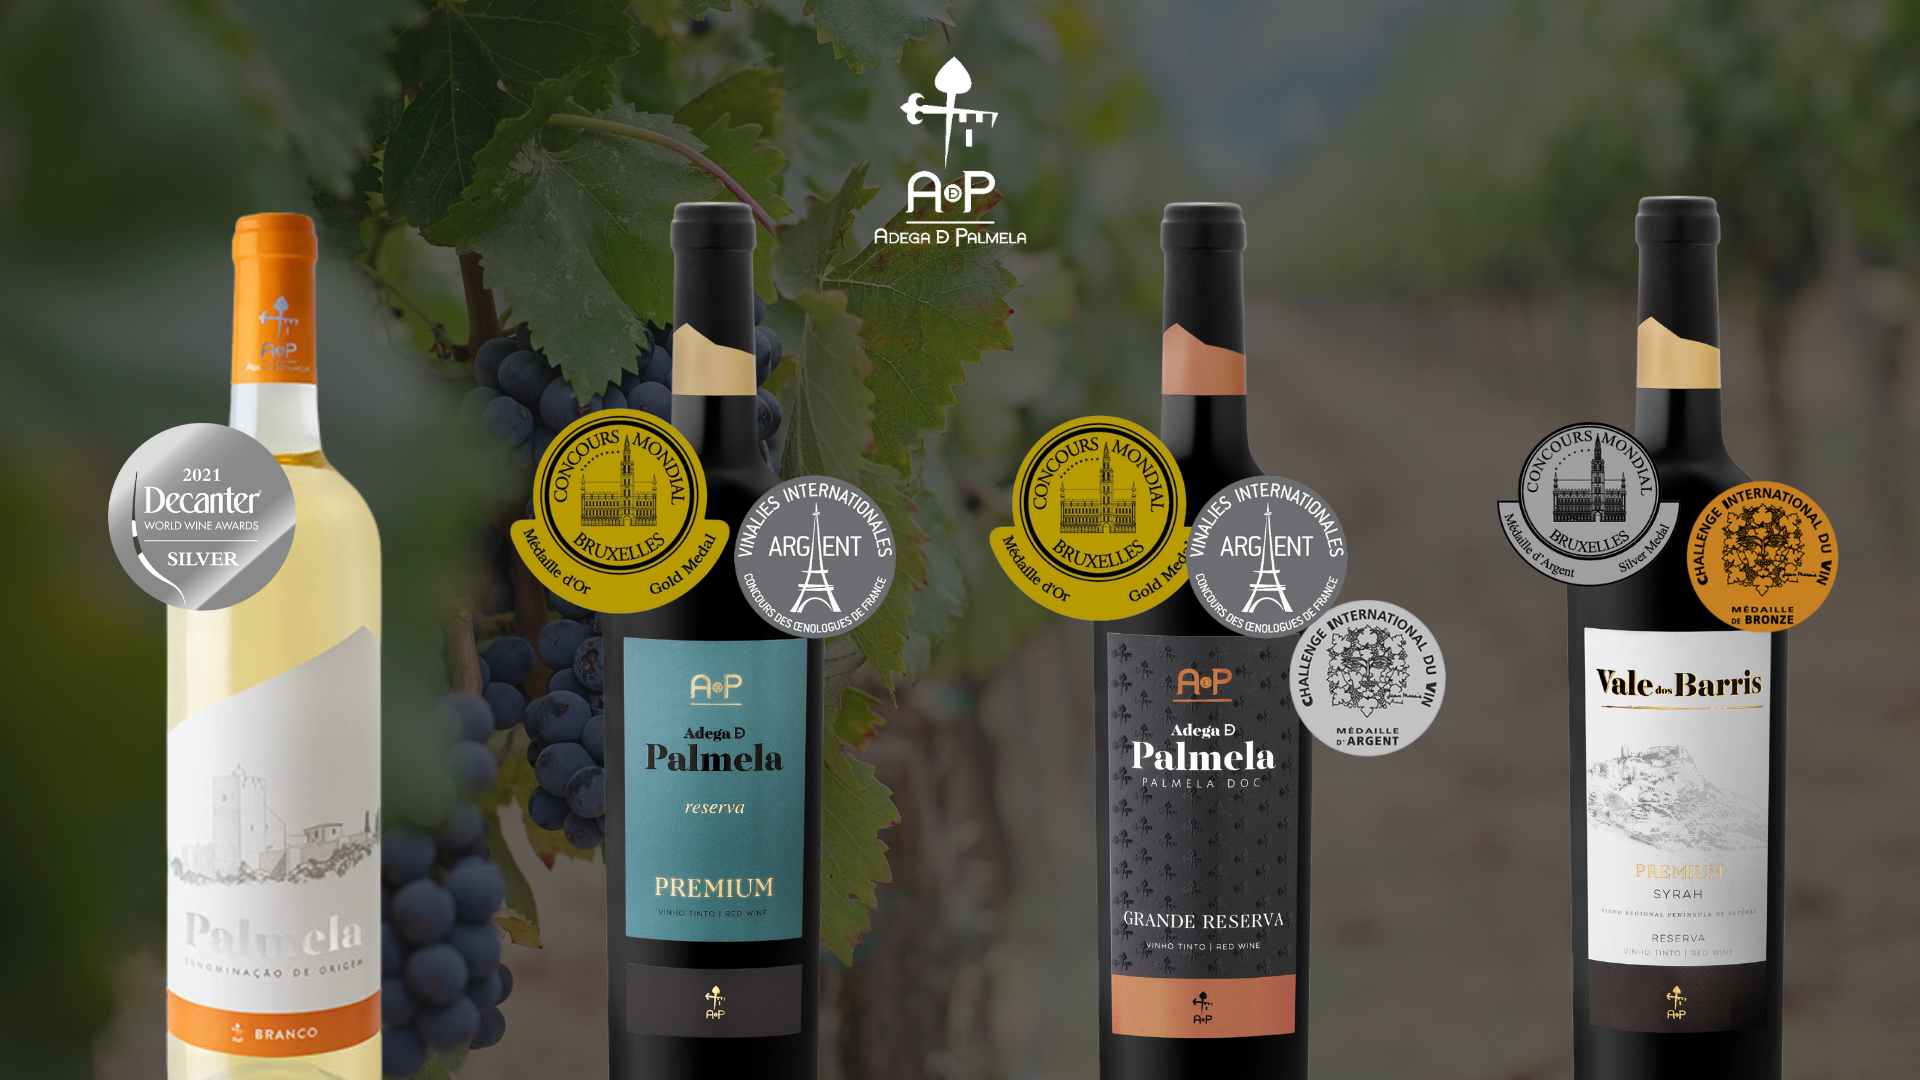 ADEGA DE PALMELA RECEIVES GOLD, SILVER AND BRONZE MEDALS IN BELGIUM, UNITED KINGDOM AND FRANCE